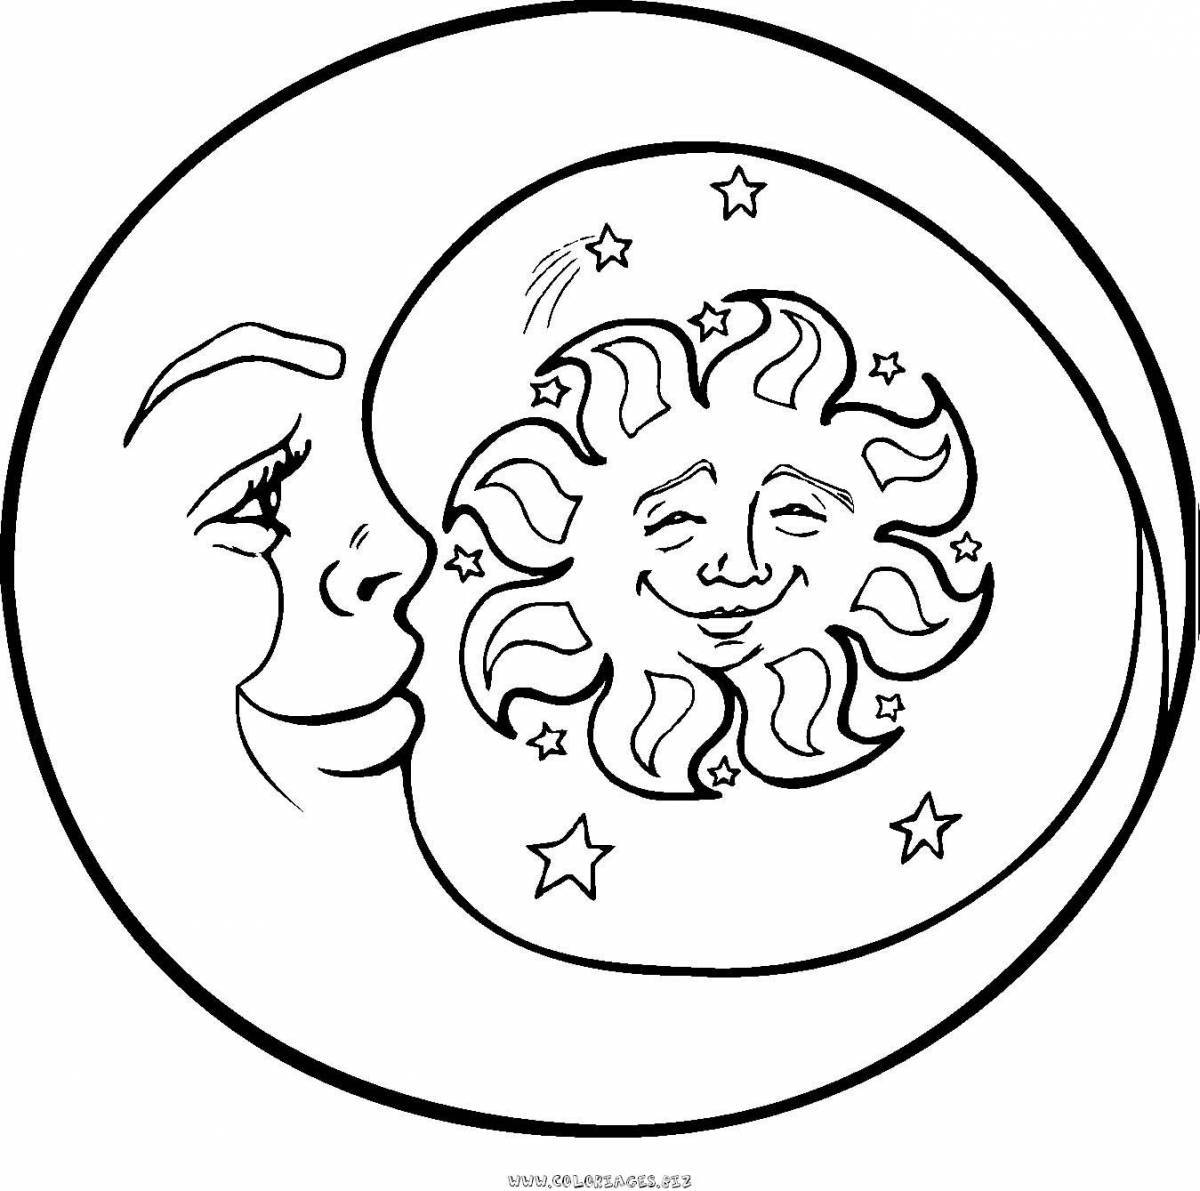 Exquisite sun and moon coloring book